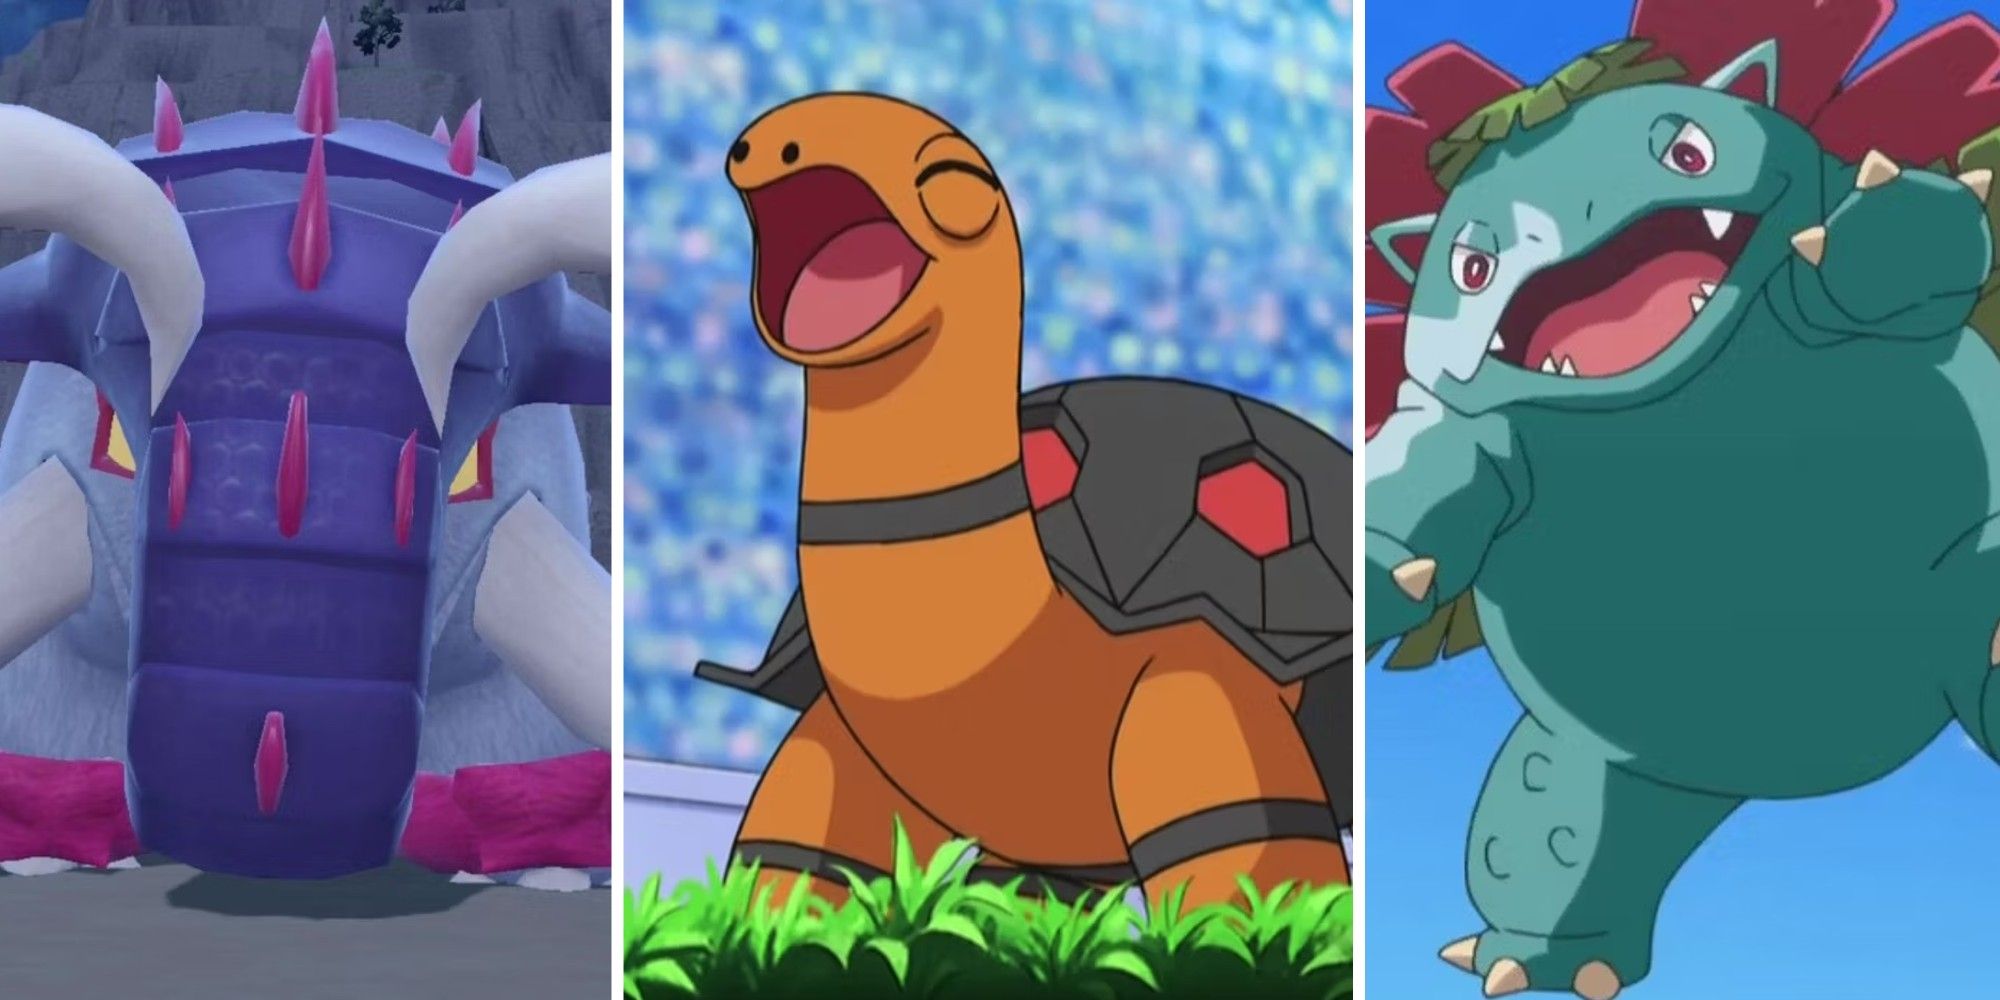 Sun Team Feature Image with Torkoal, Venasaur and Paradox Pokemon side by side